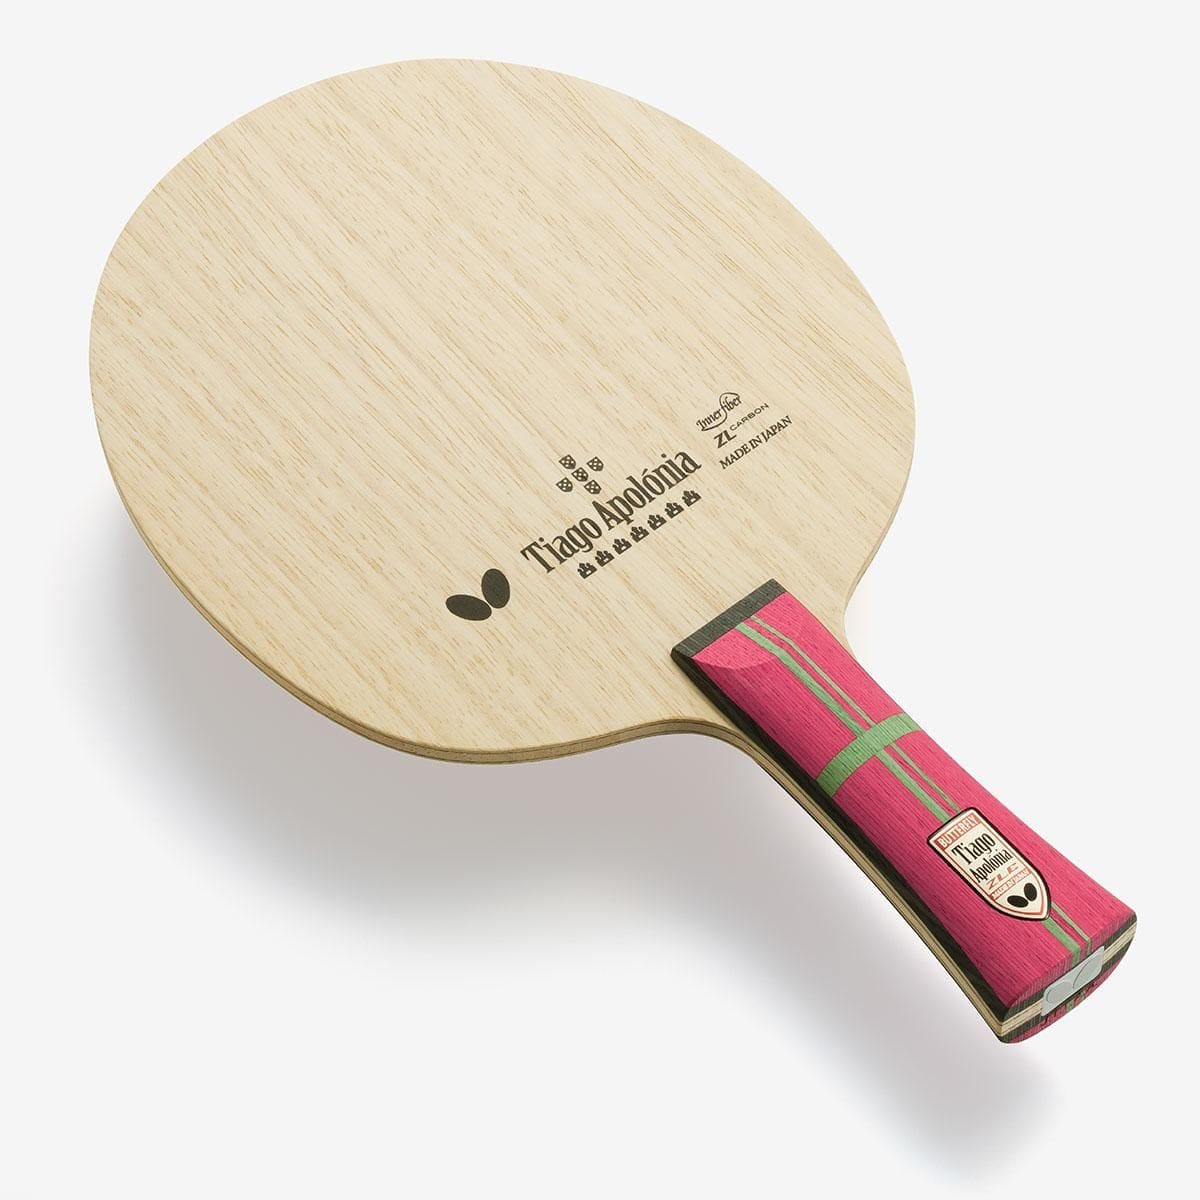 APOLONIA ZLC｜Products｜Butterfly Global Site: Table Tennis Equipment